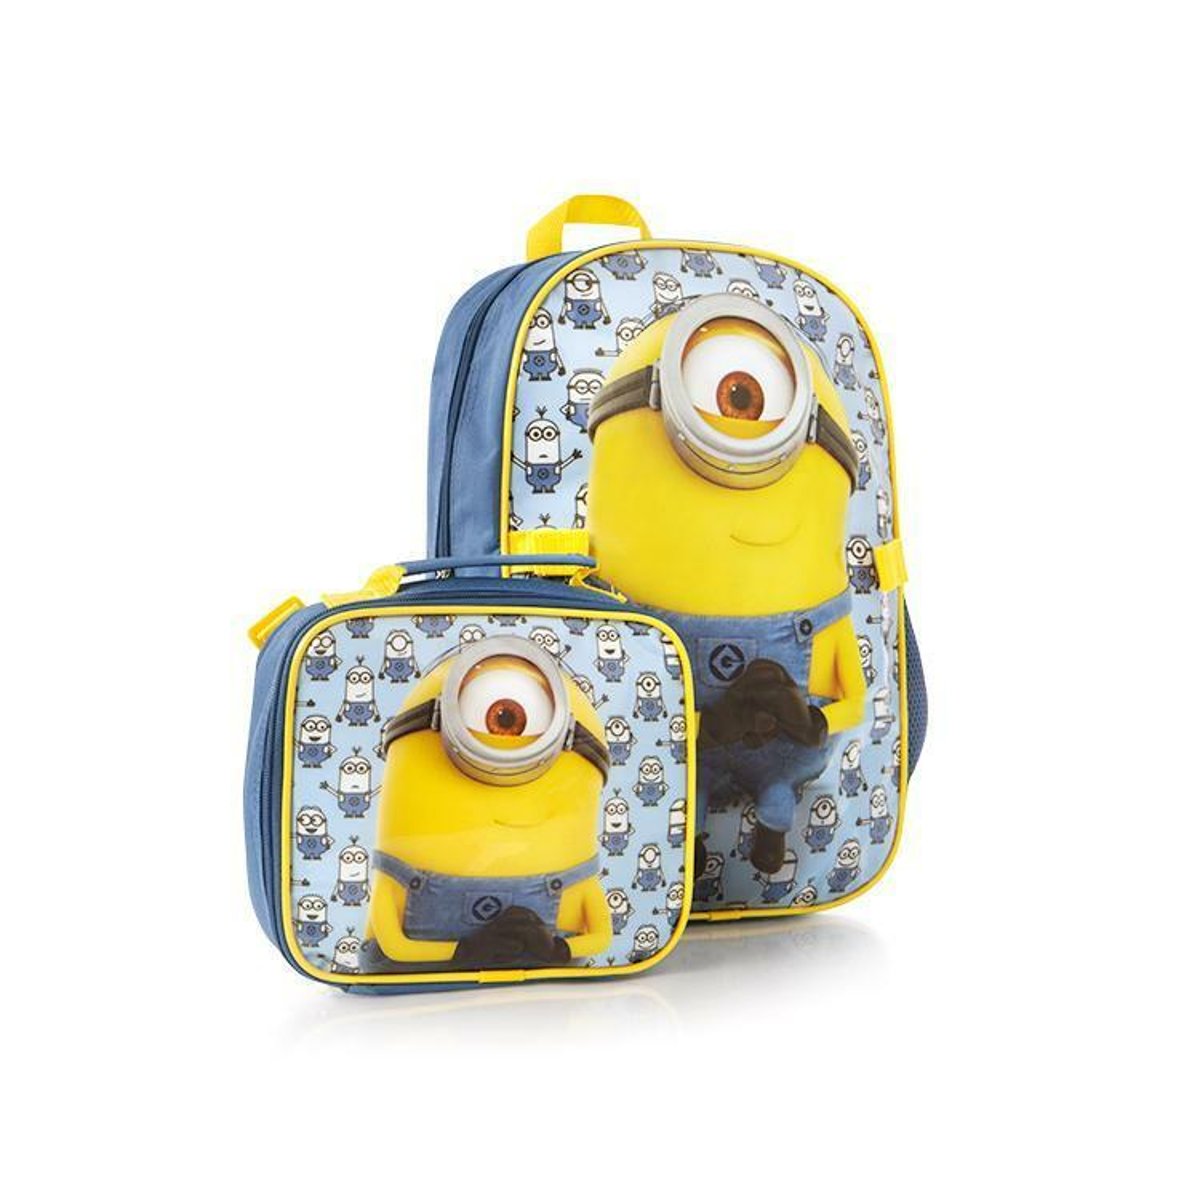 https://images.verishop.com/heys-heys-the-minions-deluxe-backpack-and-lunch-bag-set/M00665556023882-3517302828?auto=format&cs=strip&fit=max&w=1200